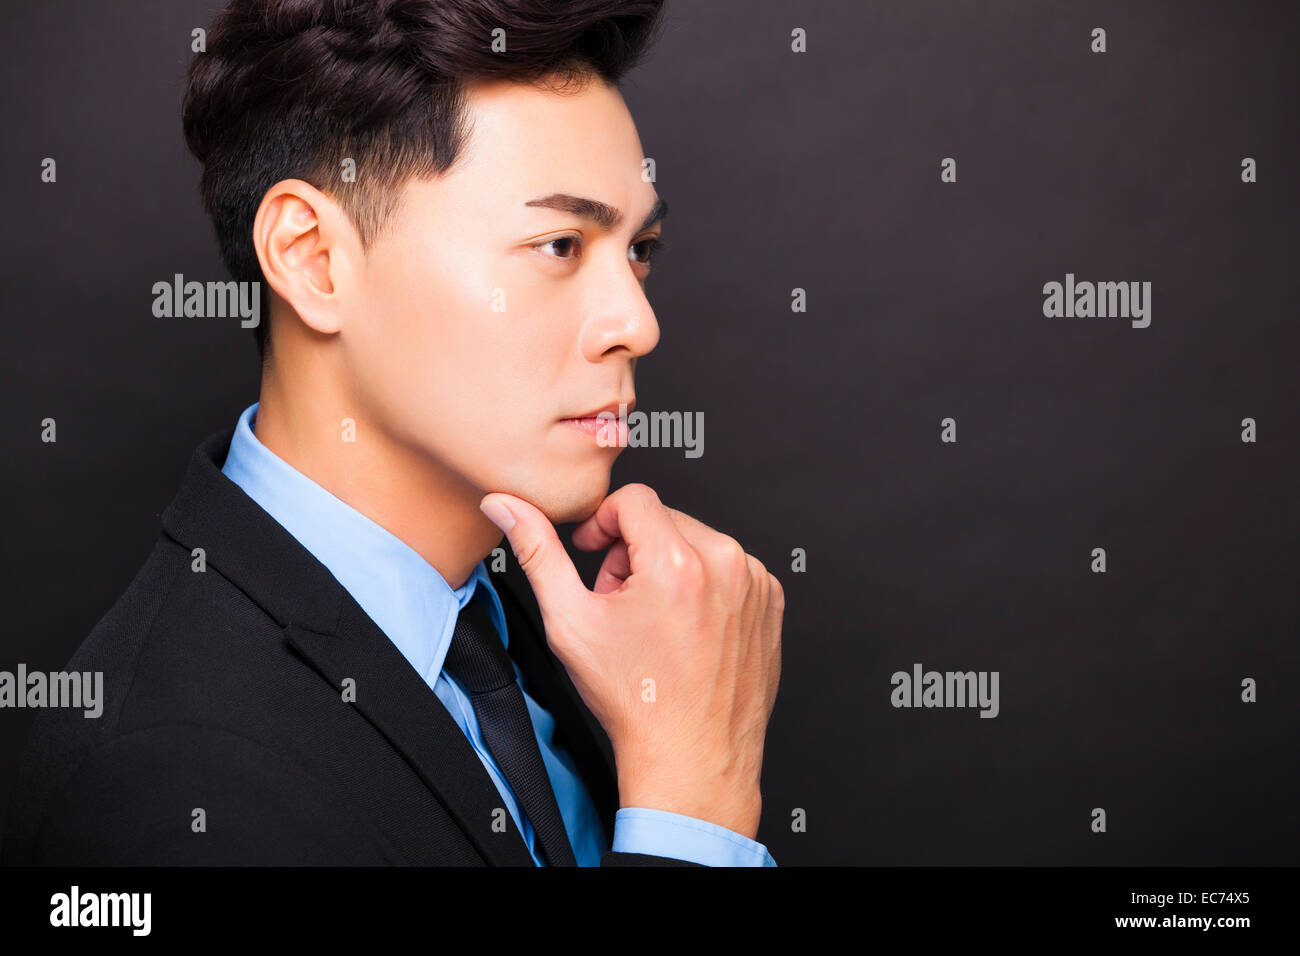 side view Smiling businessman standing on black background Stock Photo